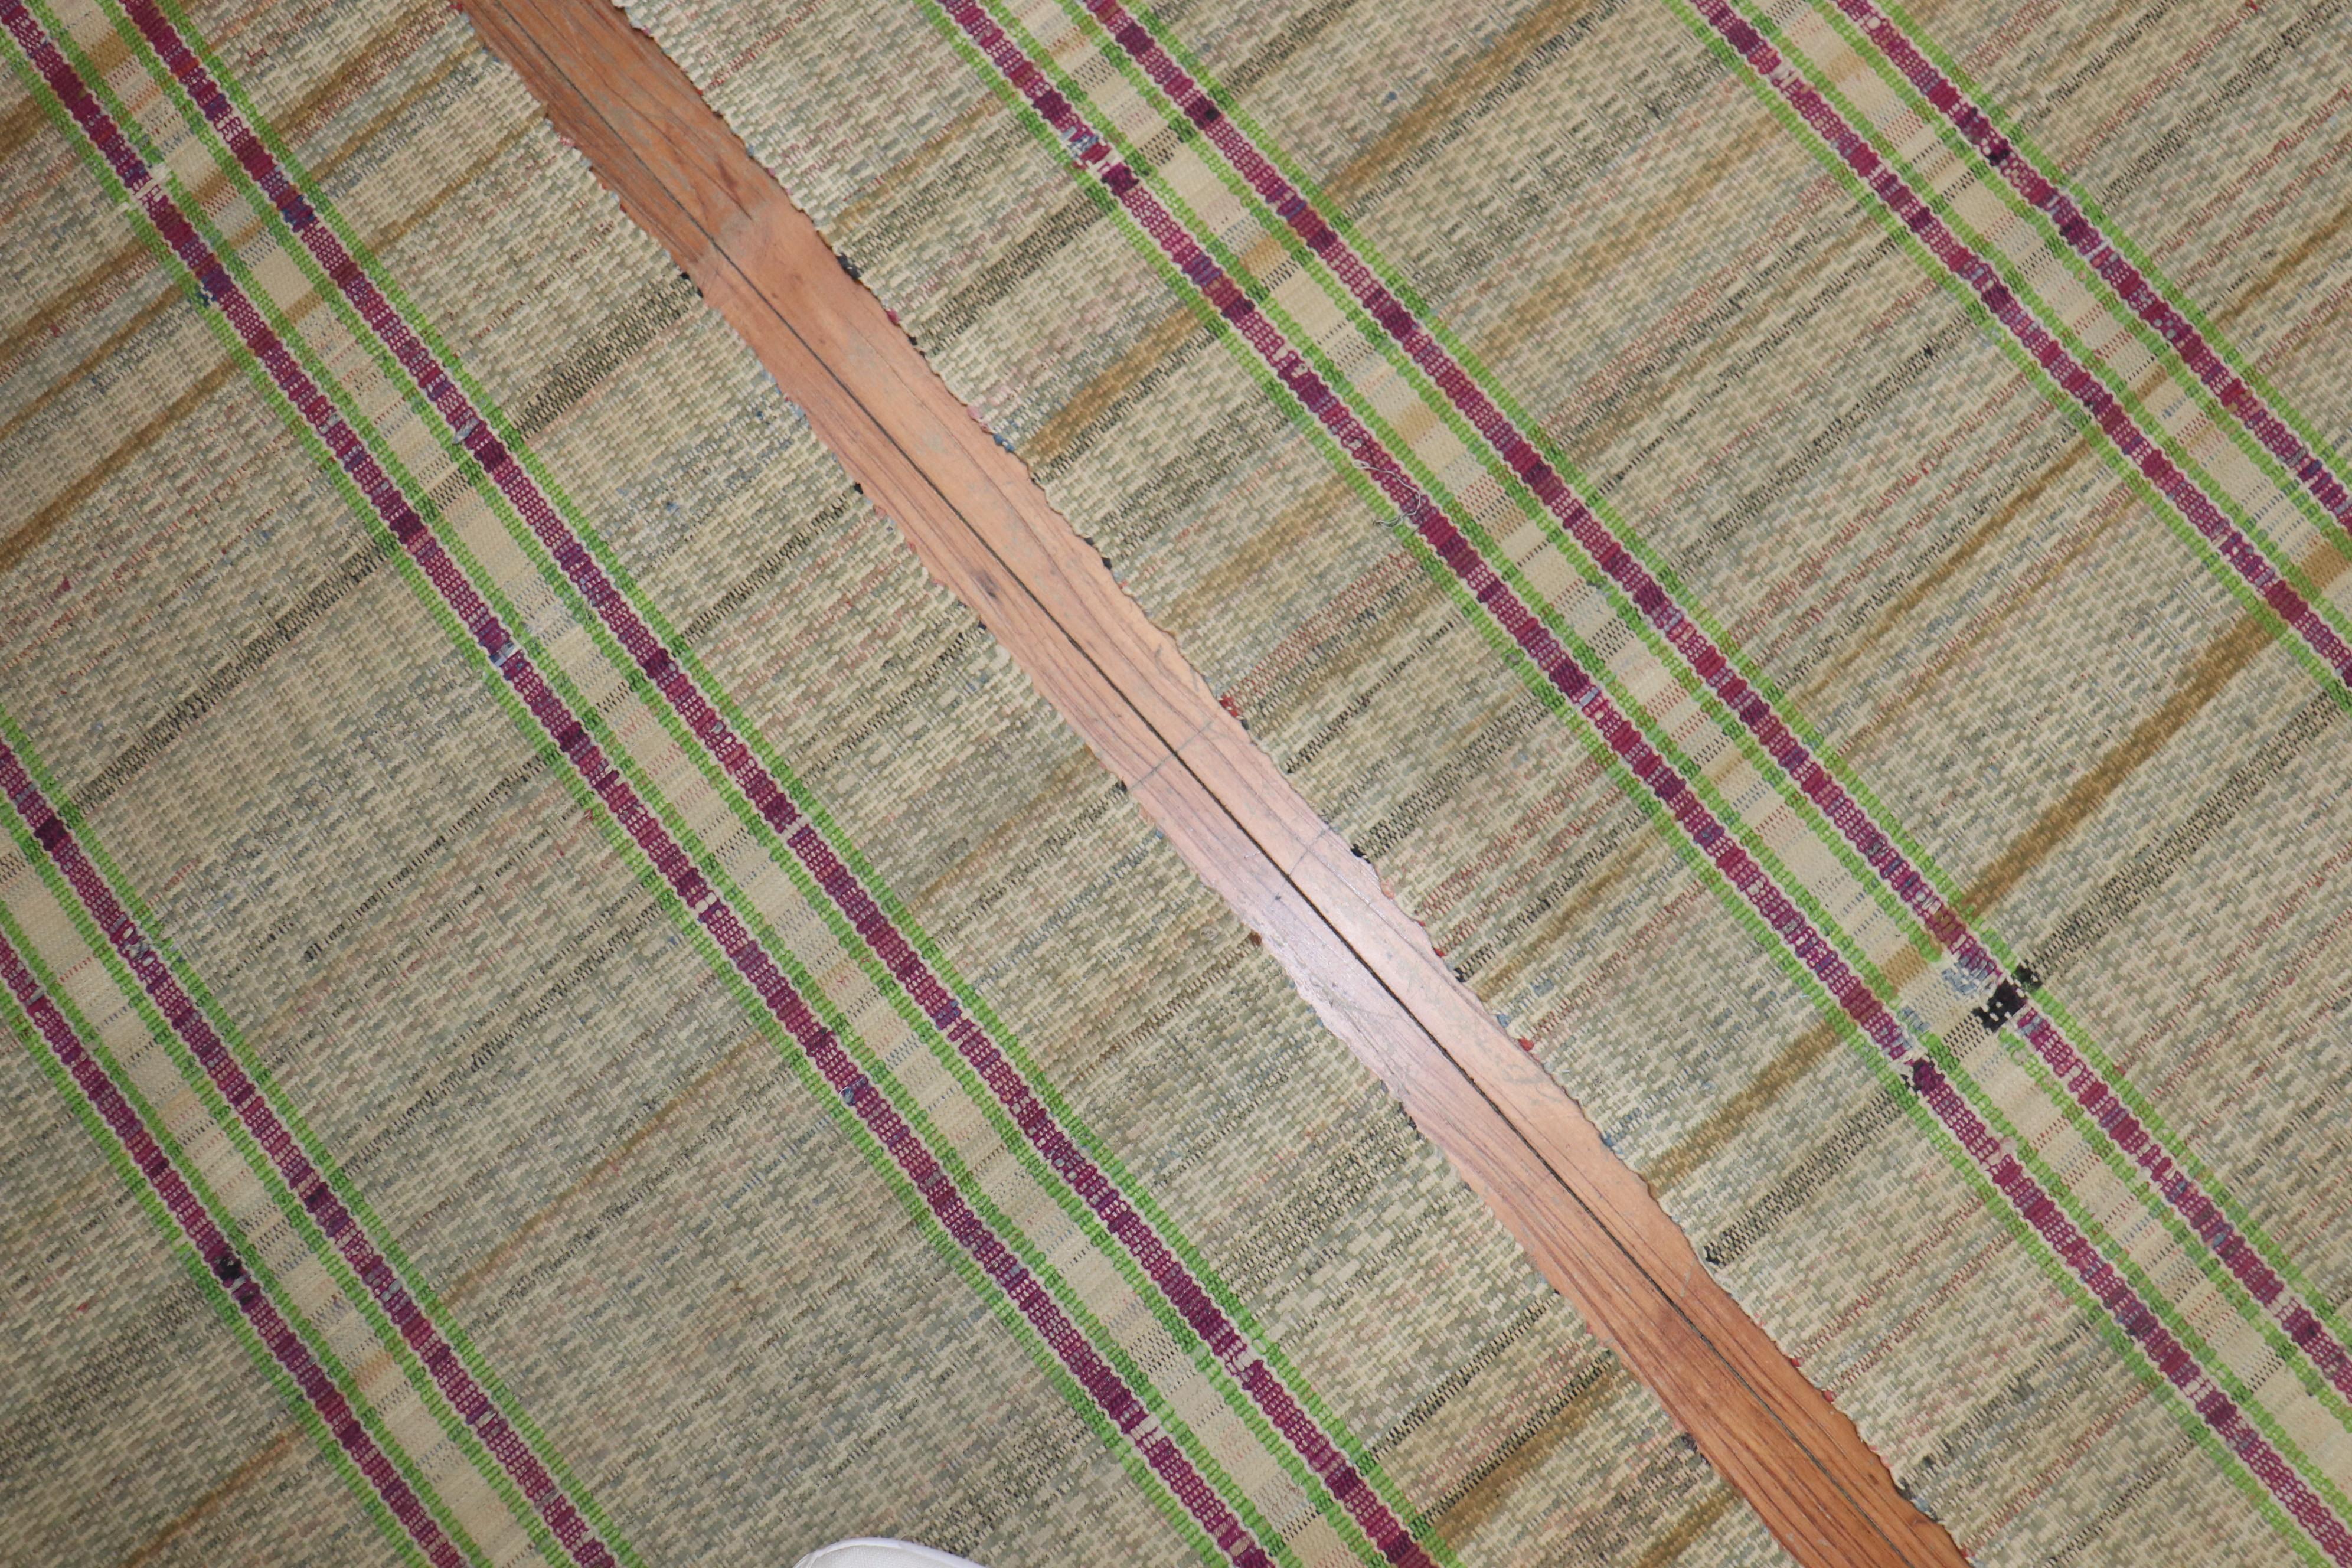 Plaid American Rag Rug Runners, Set of 2, Mid-20th Century In Good Condition For Sale In New York, NY